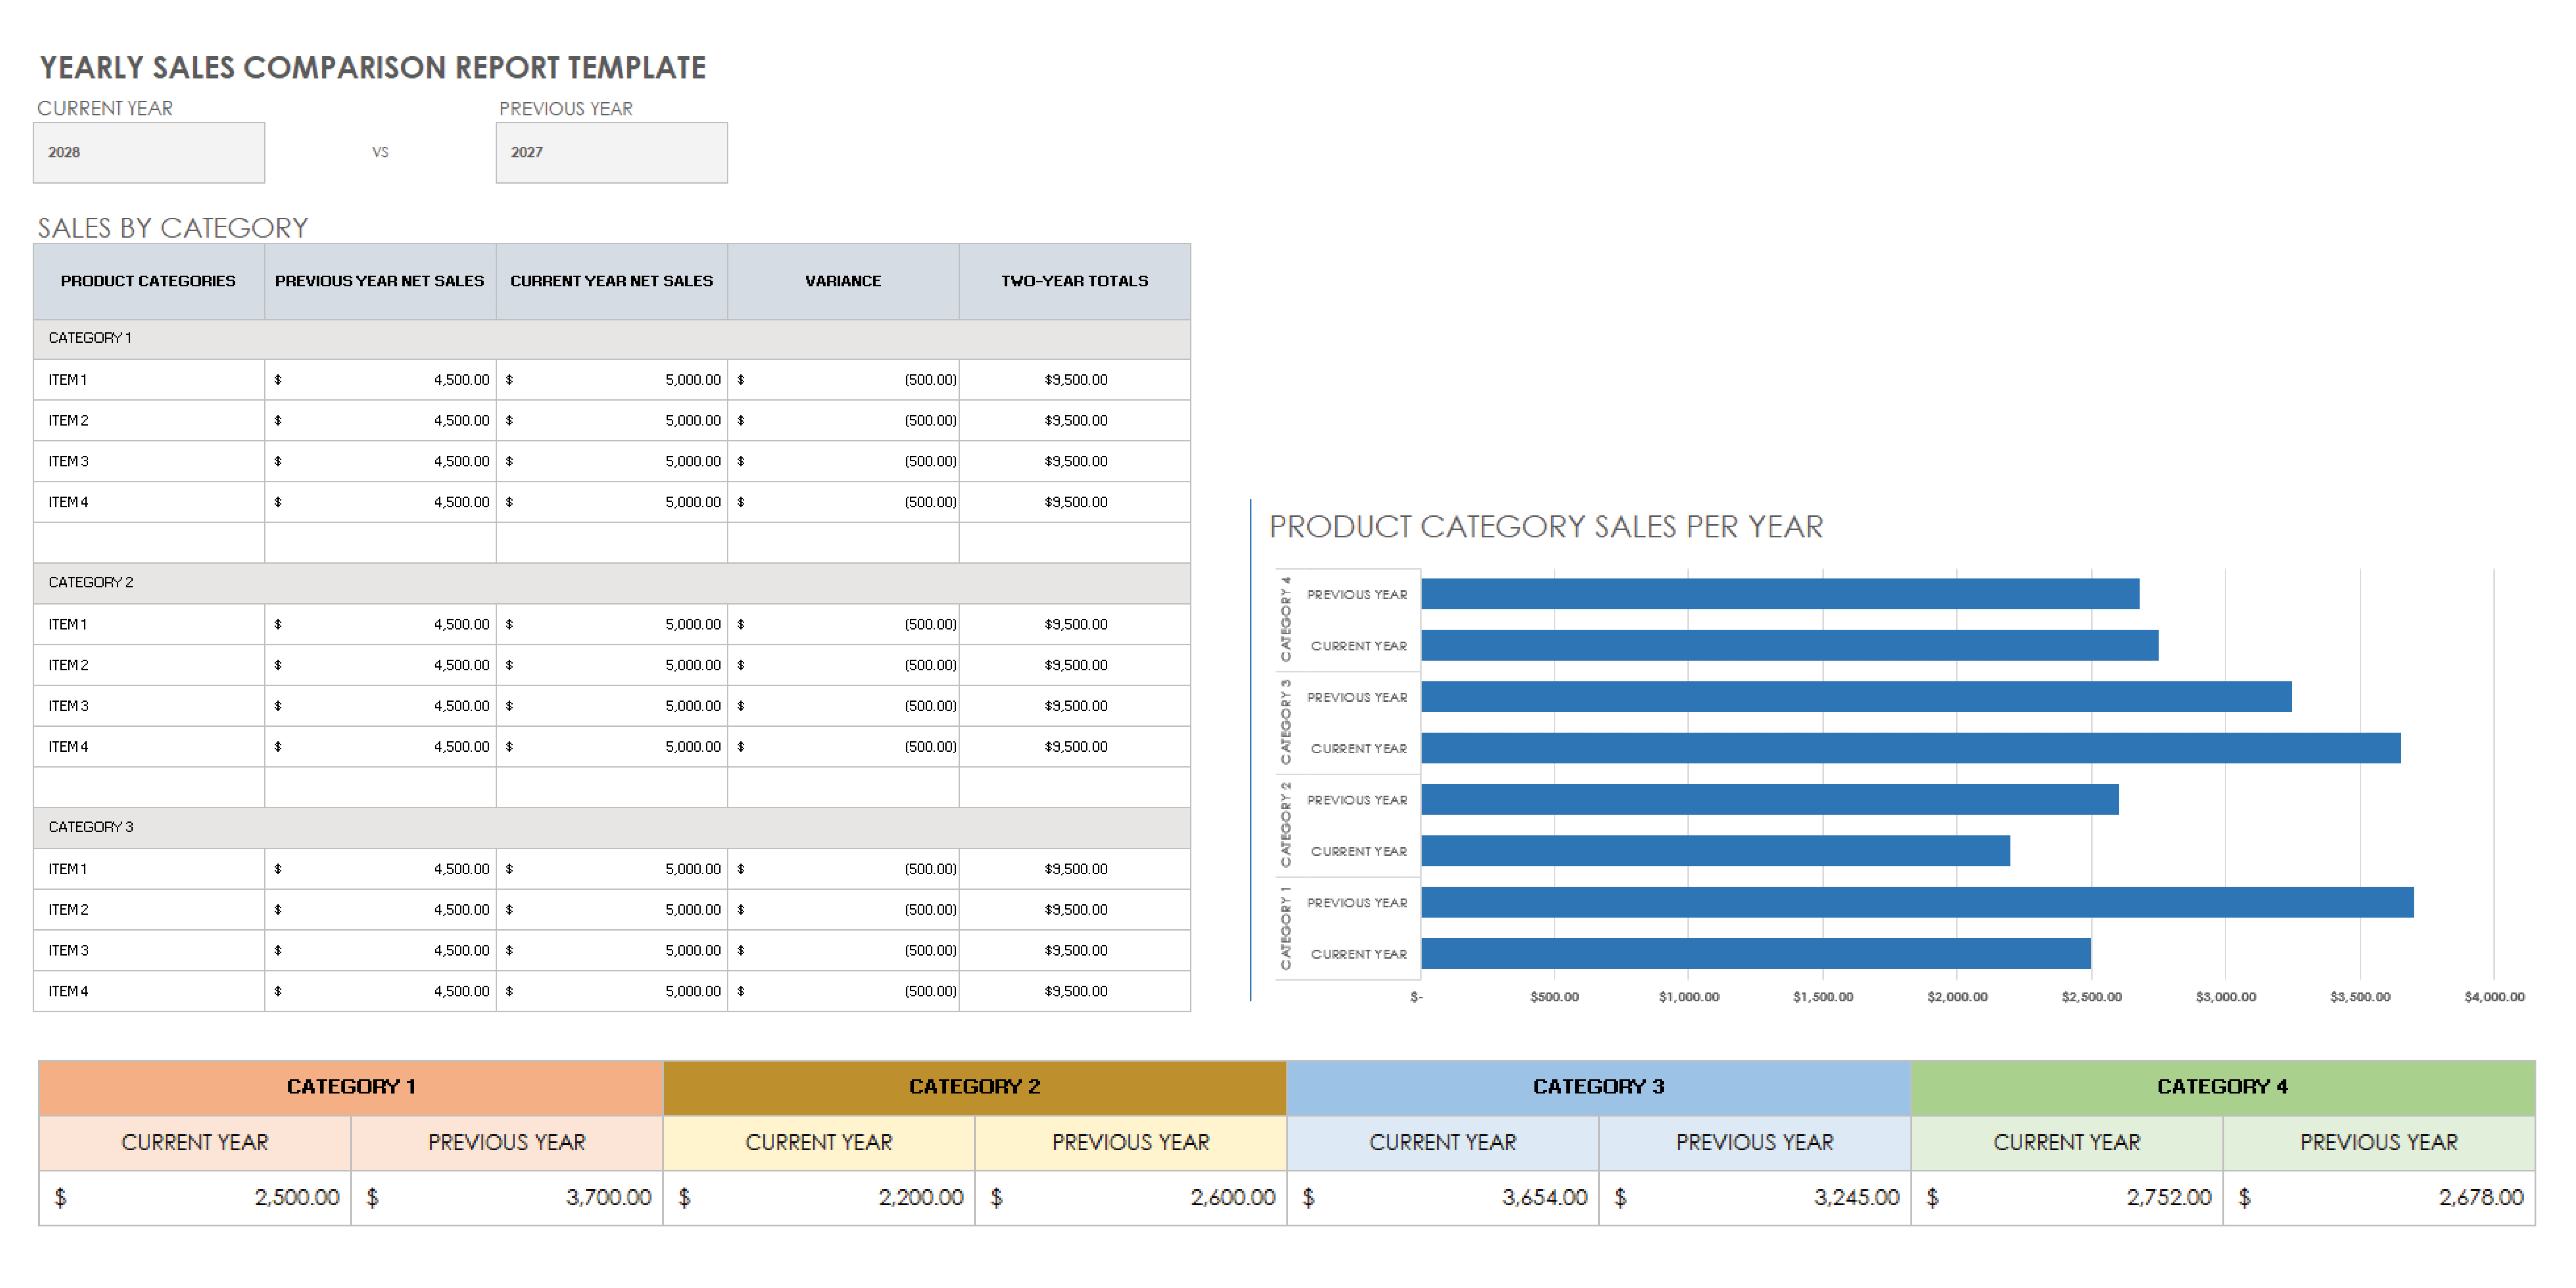 Yearly Sales Comparison Report Template